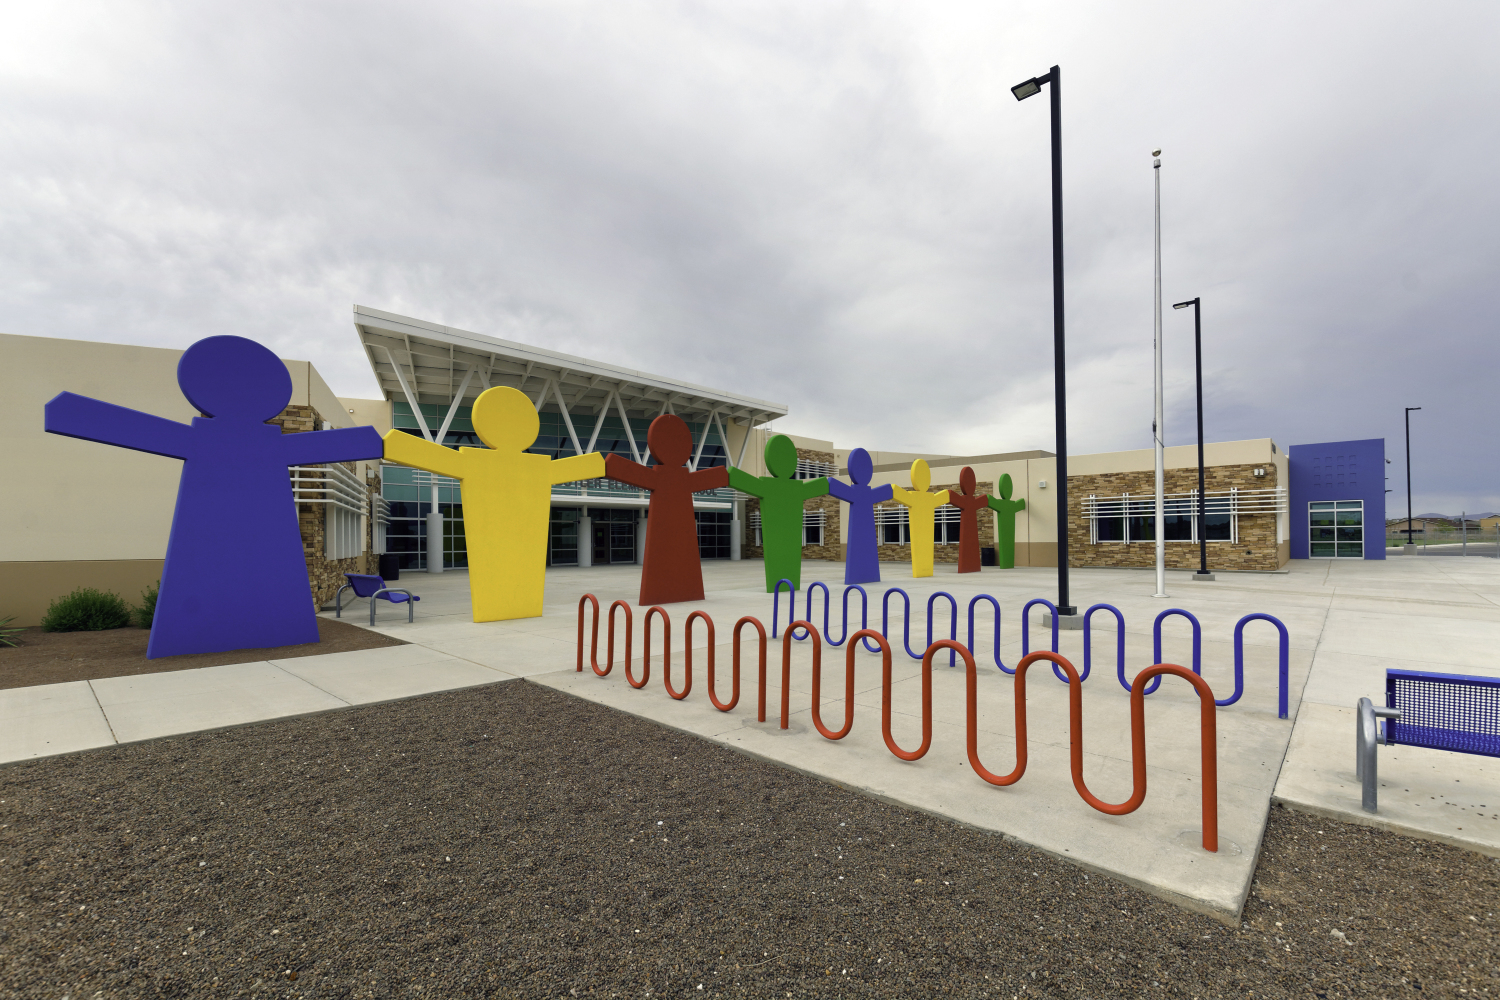 Entrance to the Puentes Butler combination elementary and middle school.